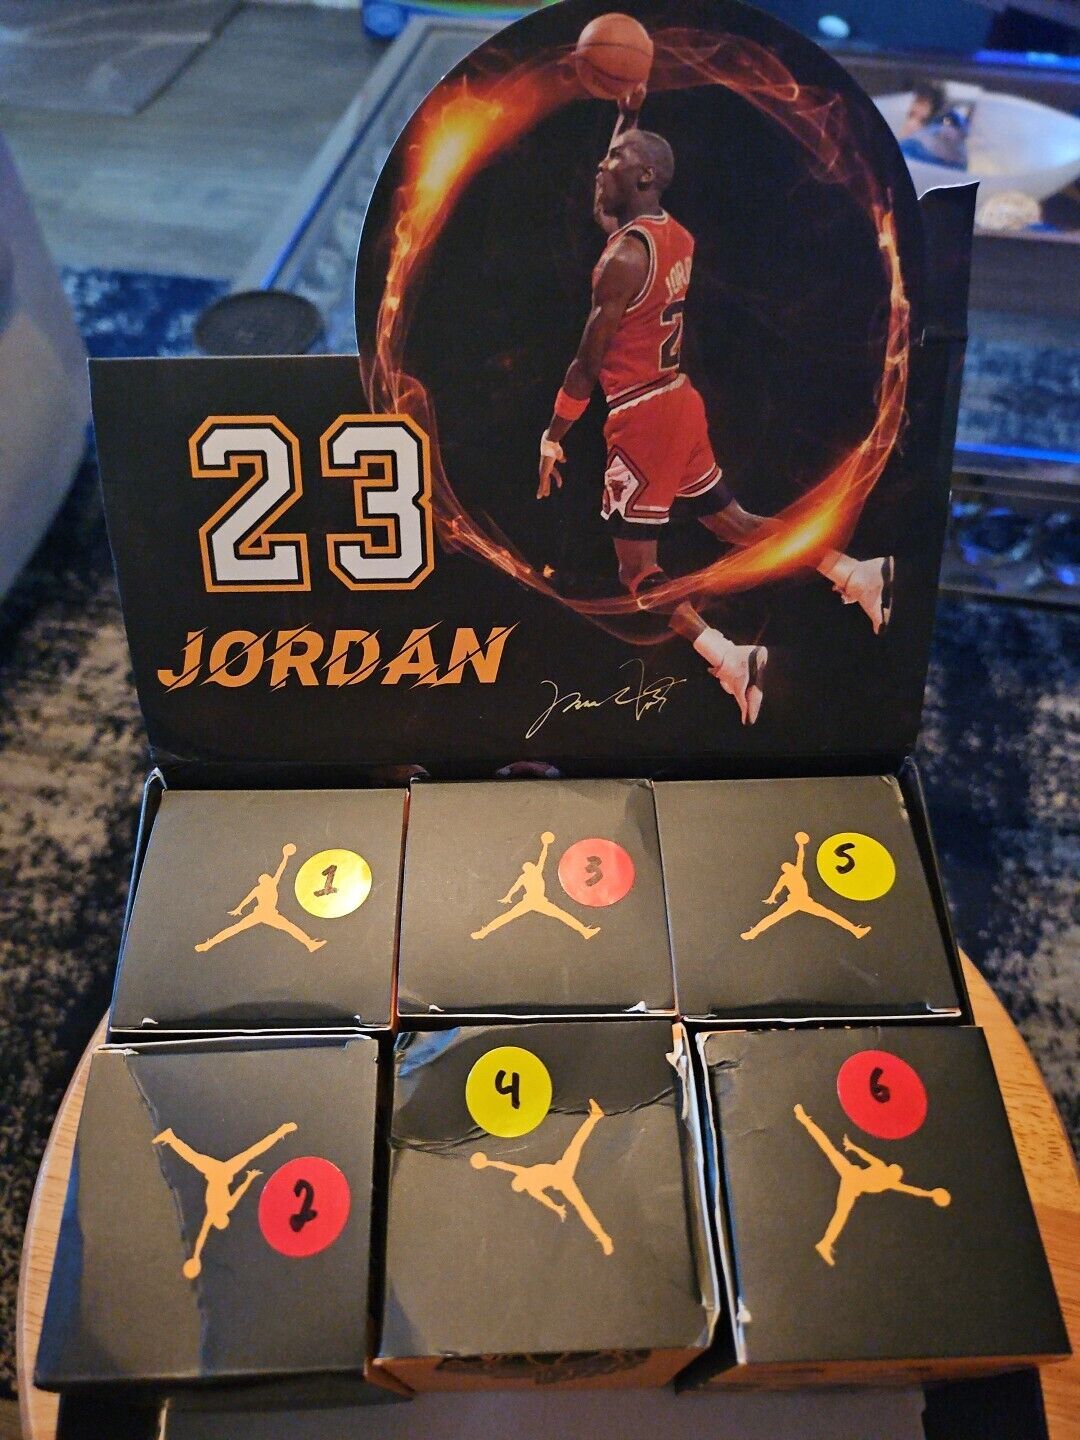 Mini Jordan Sneakers With Plastic Case 🛑Specify # You Want🛑Price For Each👟